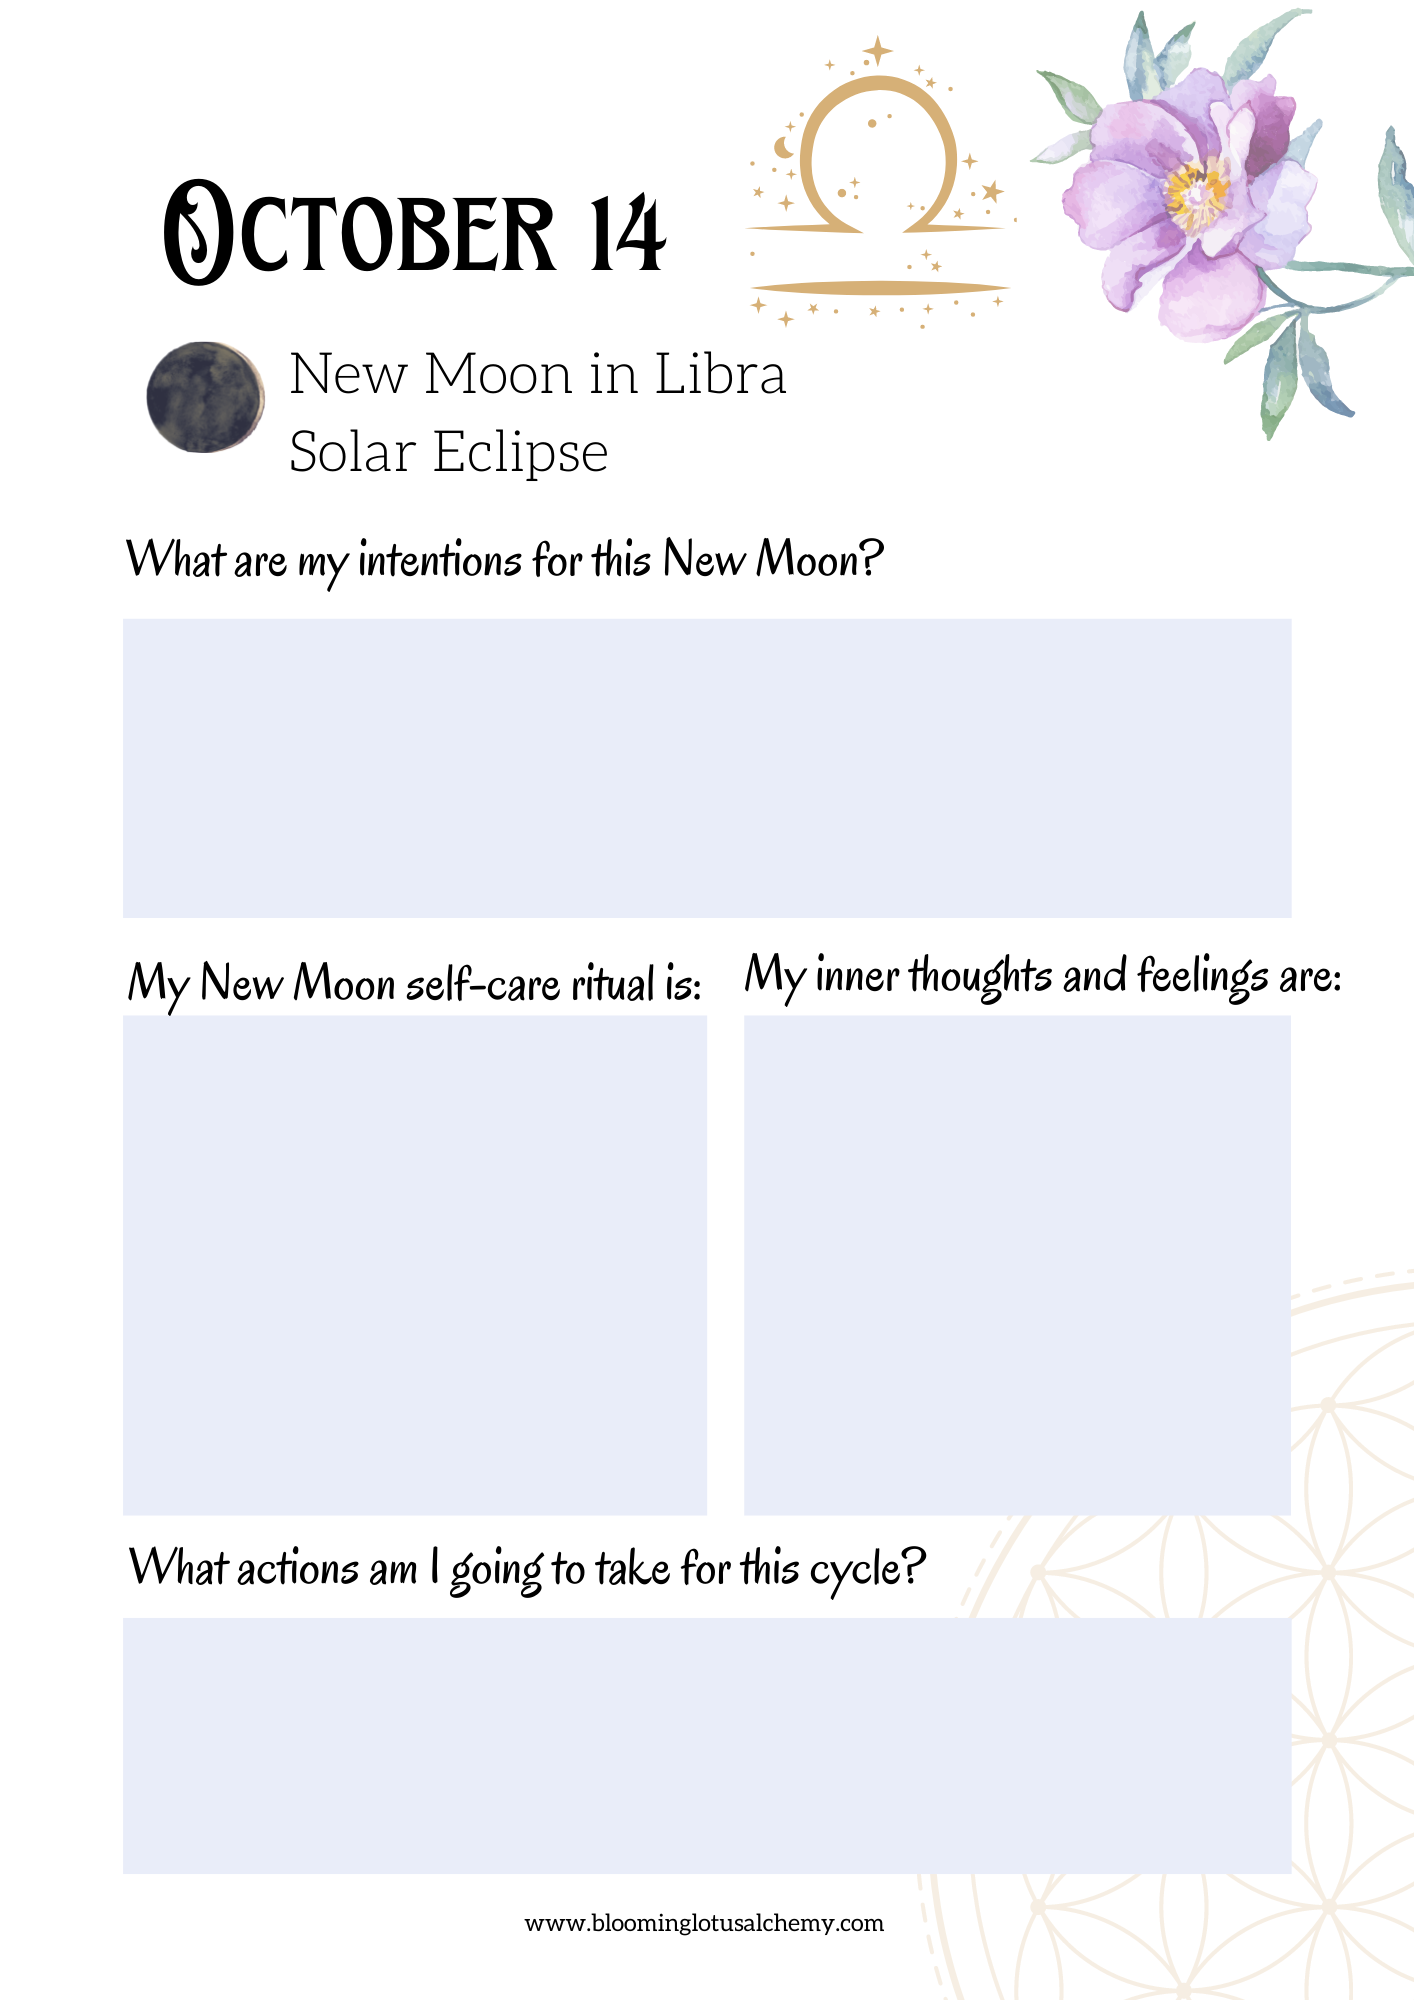 Moon Cycle & Journal Free Download